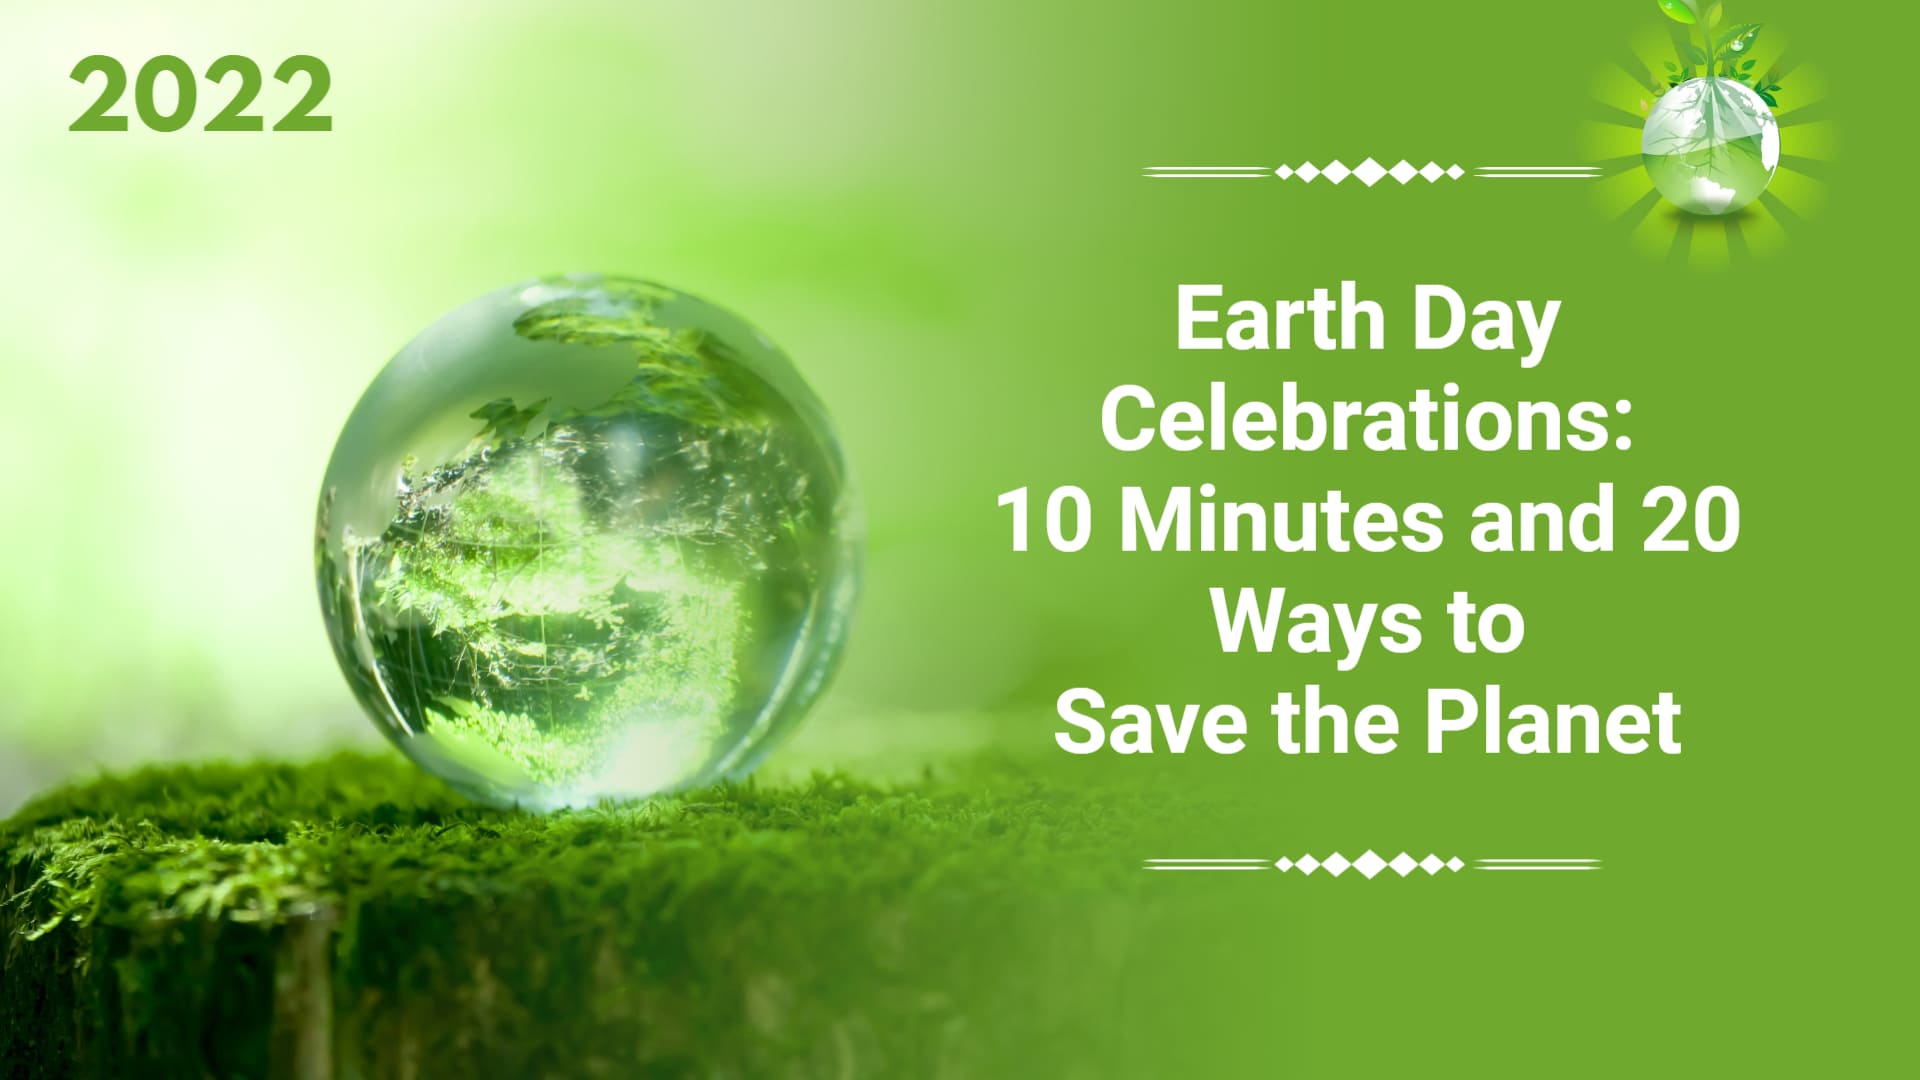 Earth Day Celebration: 10 Minutes and 20 Ways to Save the Planet